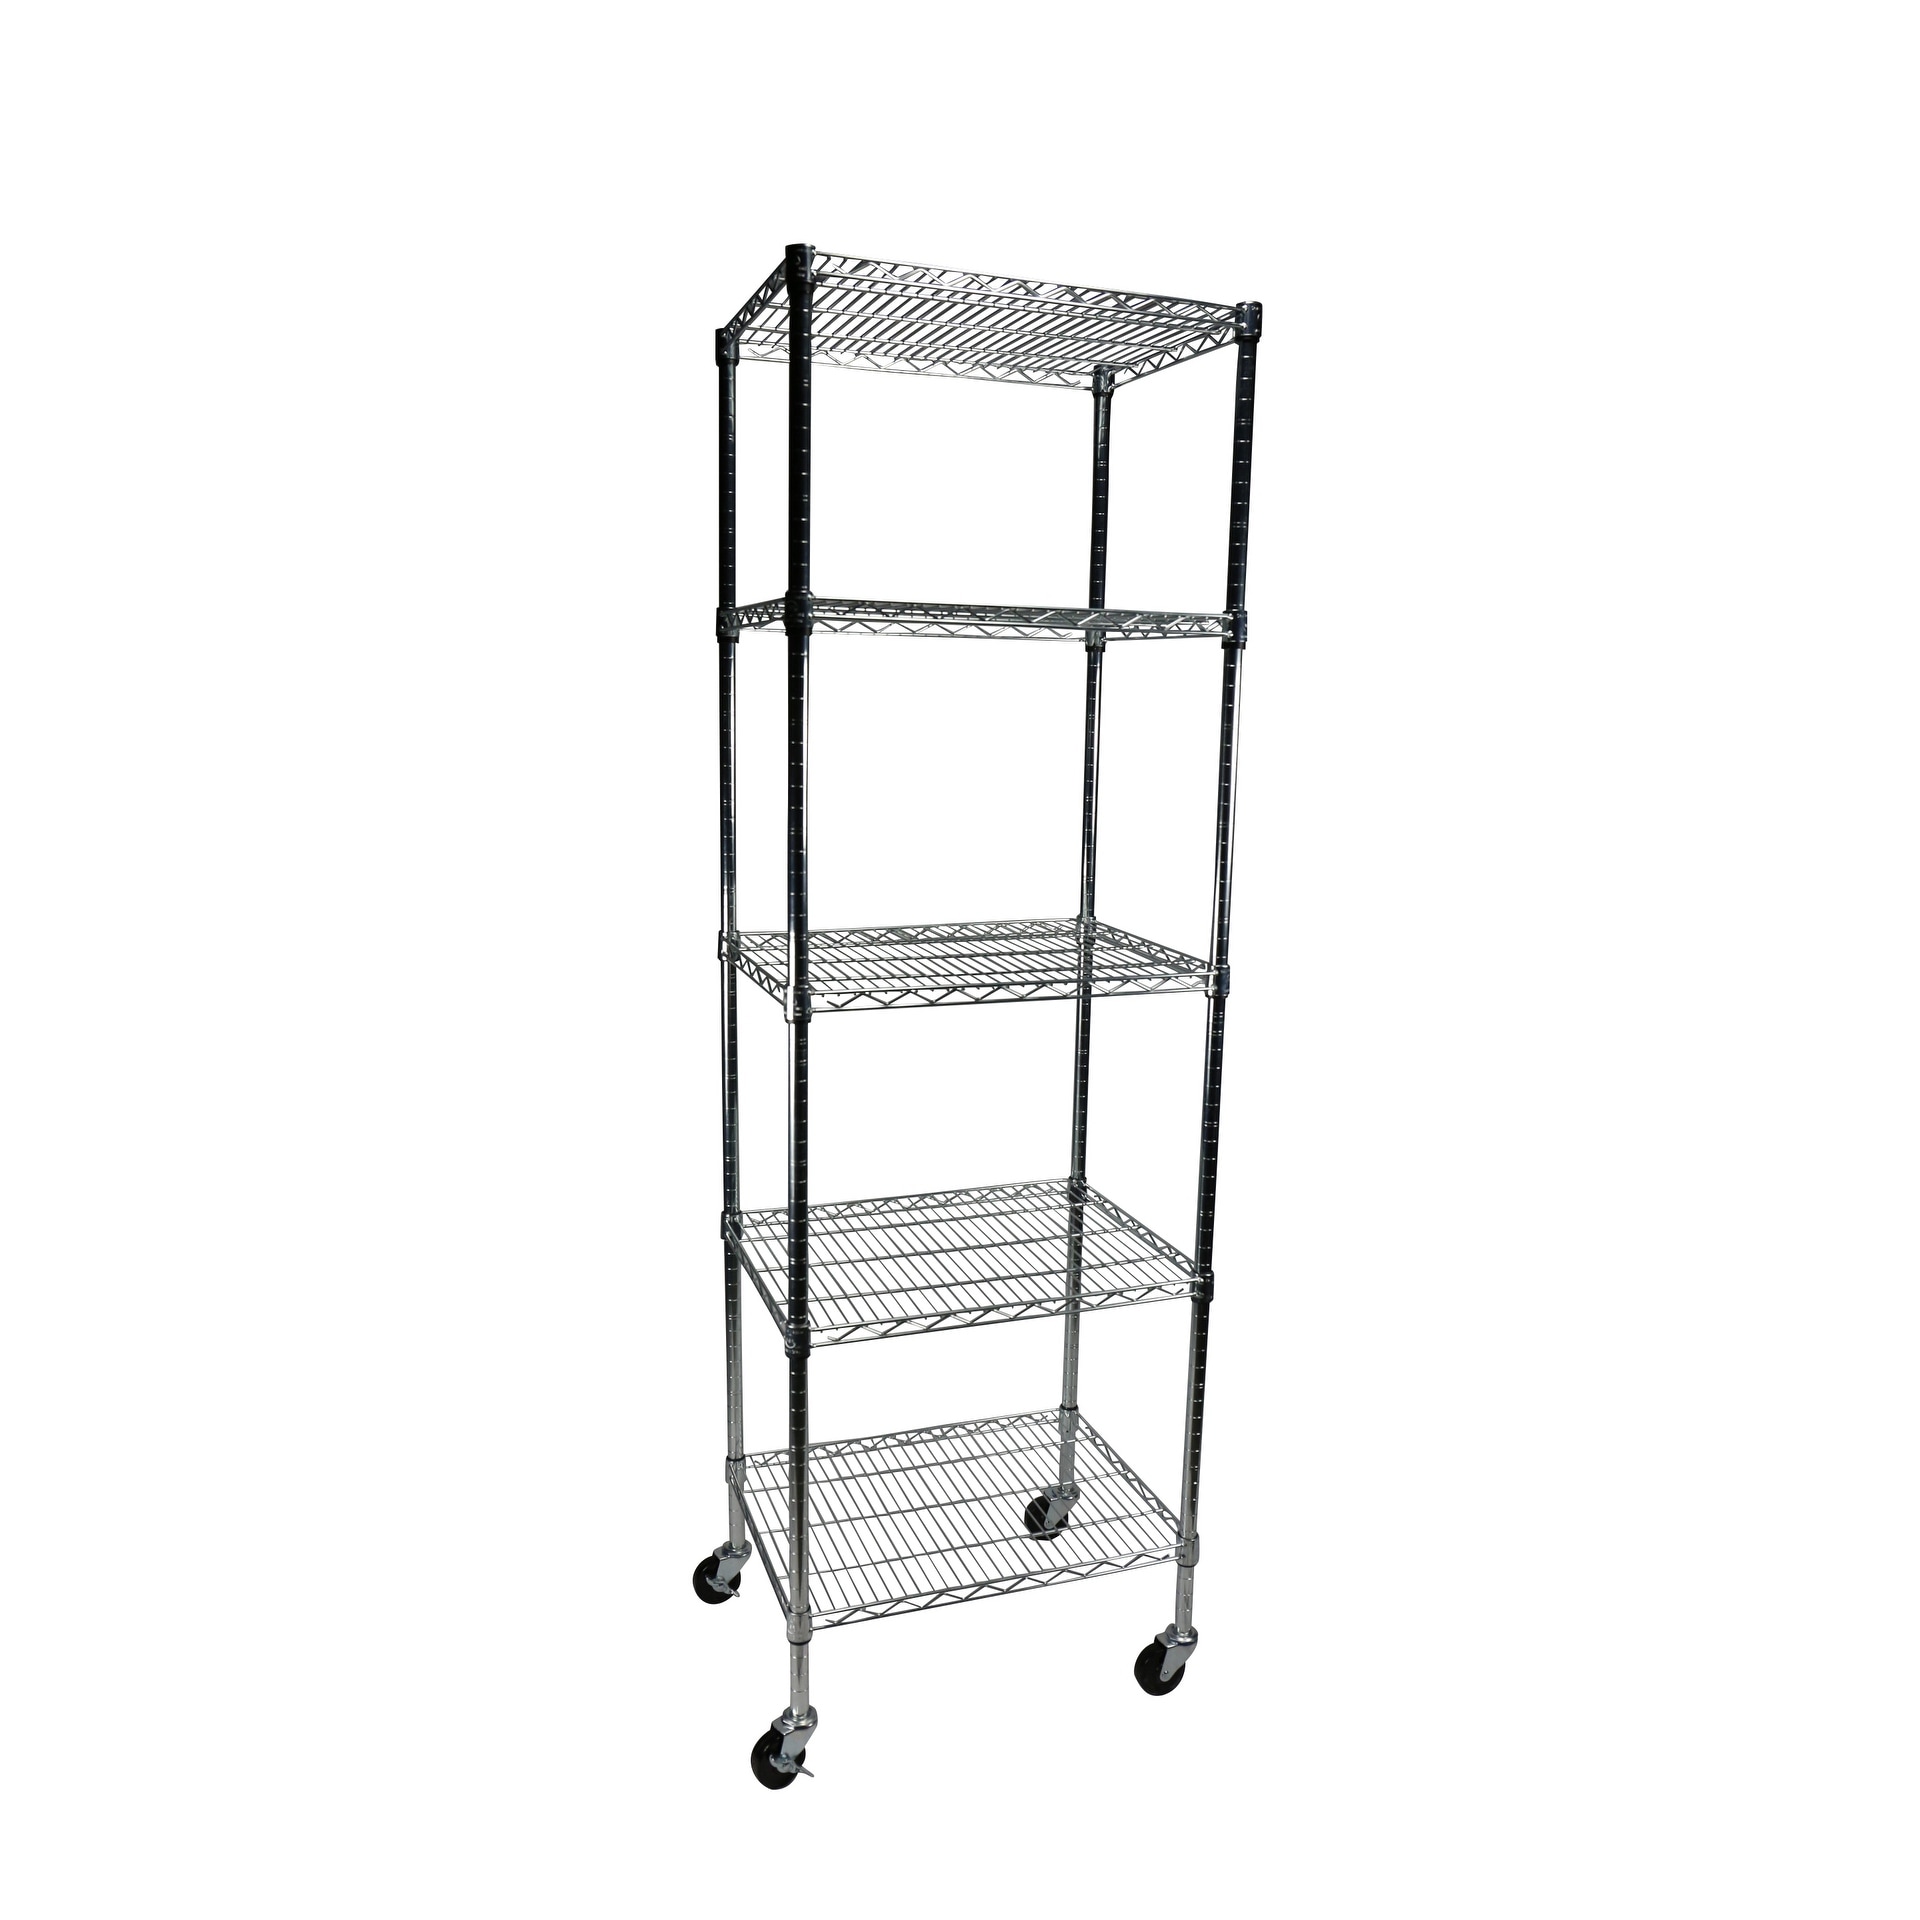 https://ak1.ostkcdn.com/images/products/is/images/direct/30df28945ae6eae2370f1d647288f283e804ef23/Apollo-Hardware-Commercial-Chrome-5-Wire-Shelf-18%22x24%22x72%22-with-Caster.jpg